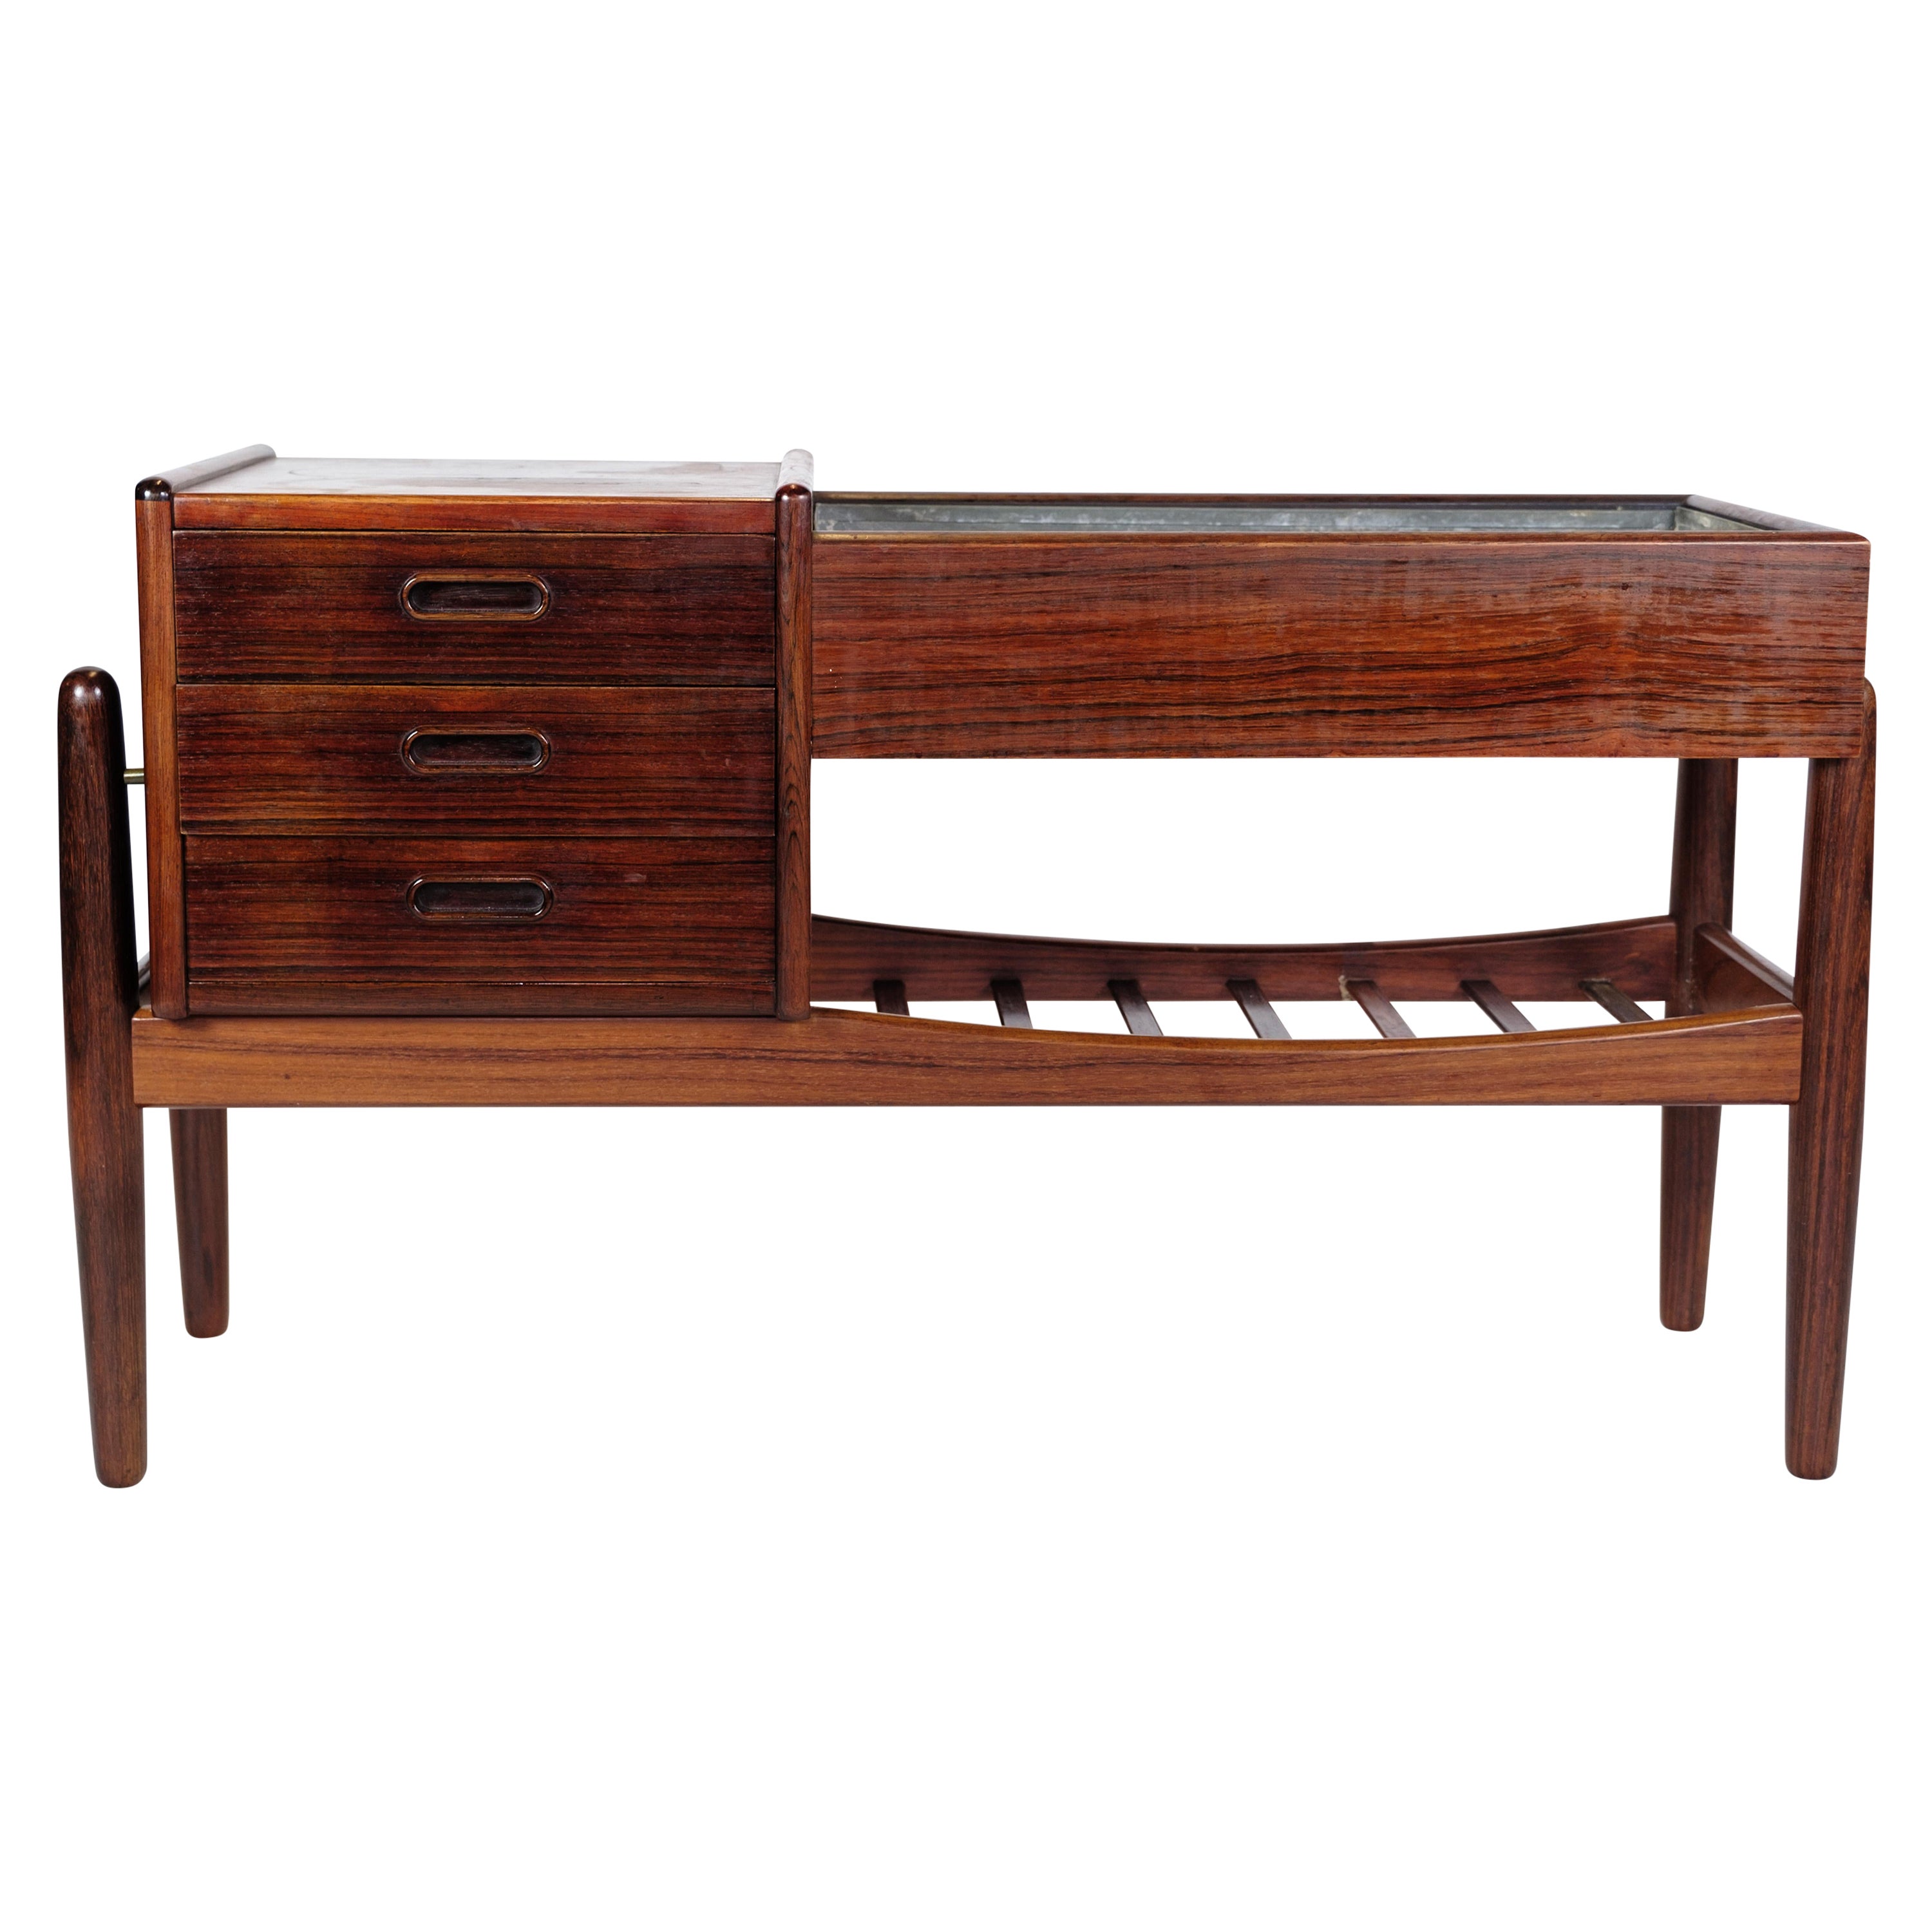 Planter in Rosewood Model 26 by Arne Wahl Iversen From 1959 For Sale